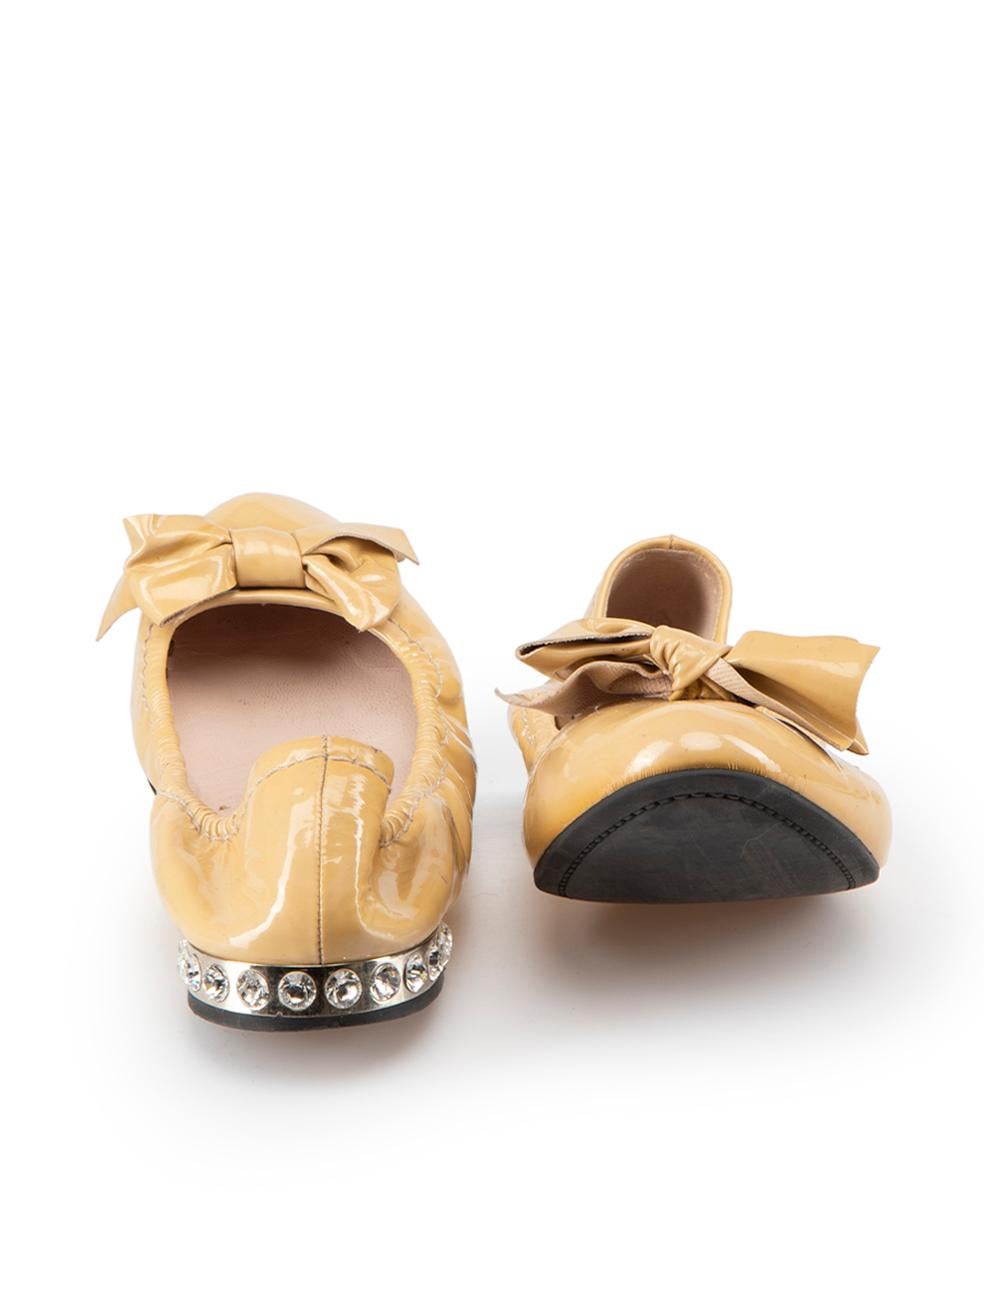 Miu Miu Camel Patent Leather Ballet Flats Size IT 38 In Good Condition For Sale In London, GB